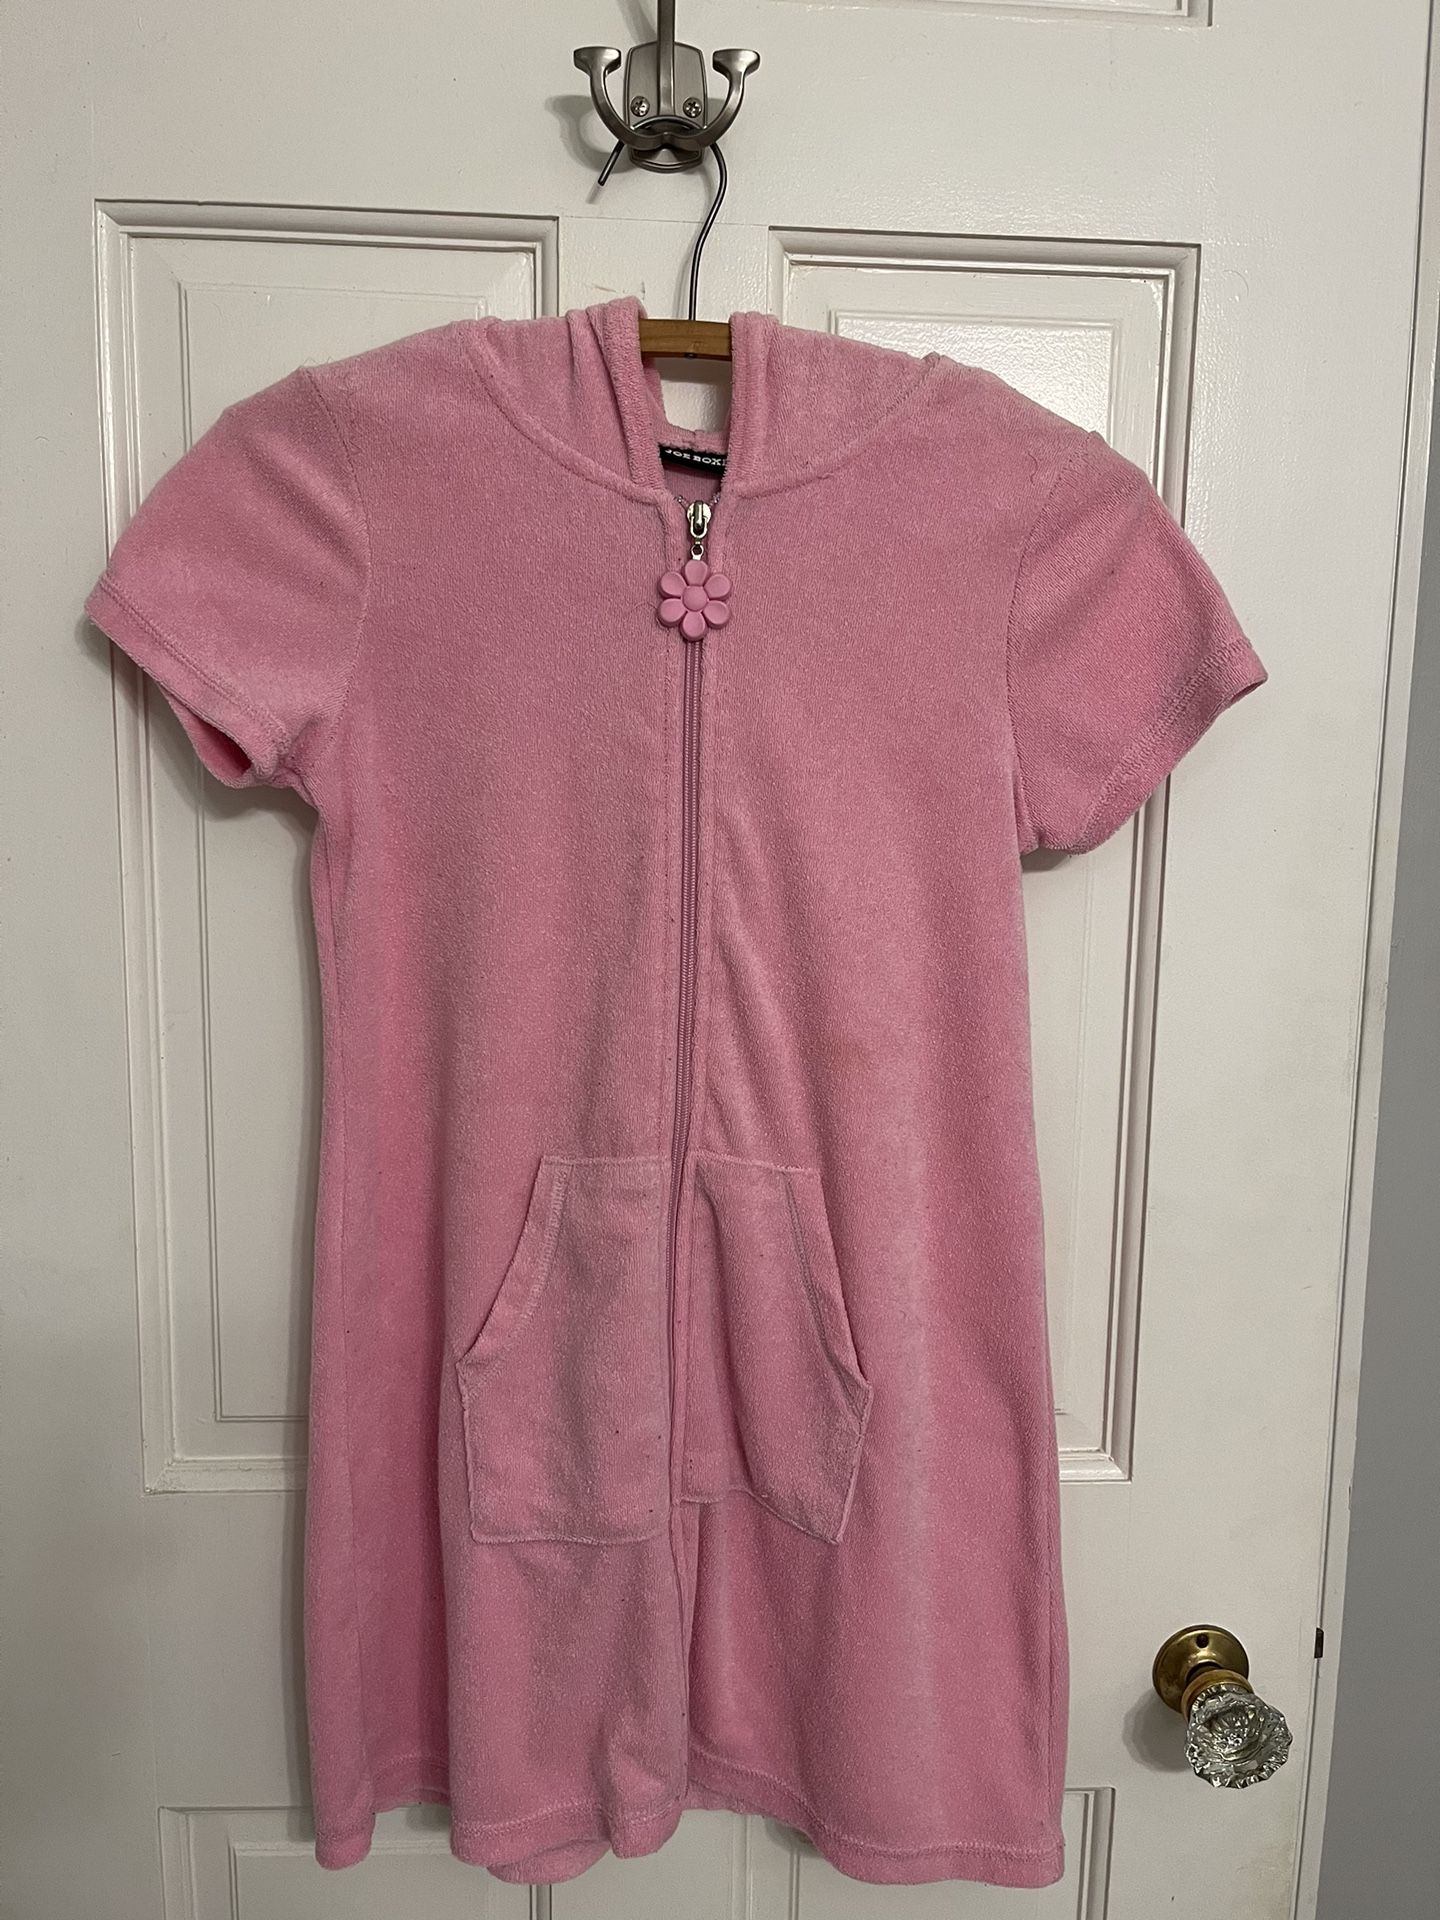 Girl's Size 10/12 Pink Terry Cloth Zip Cover Up by Joe Boxer